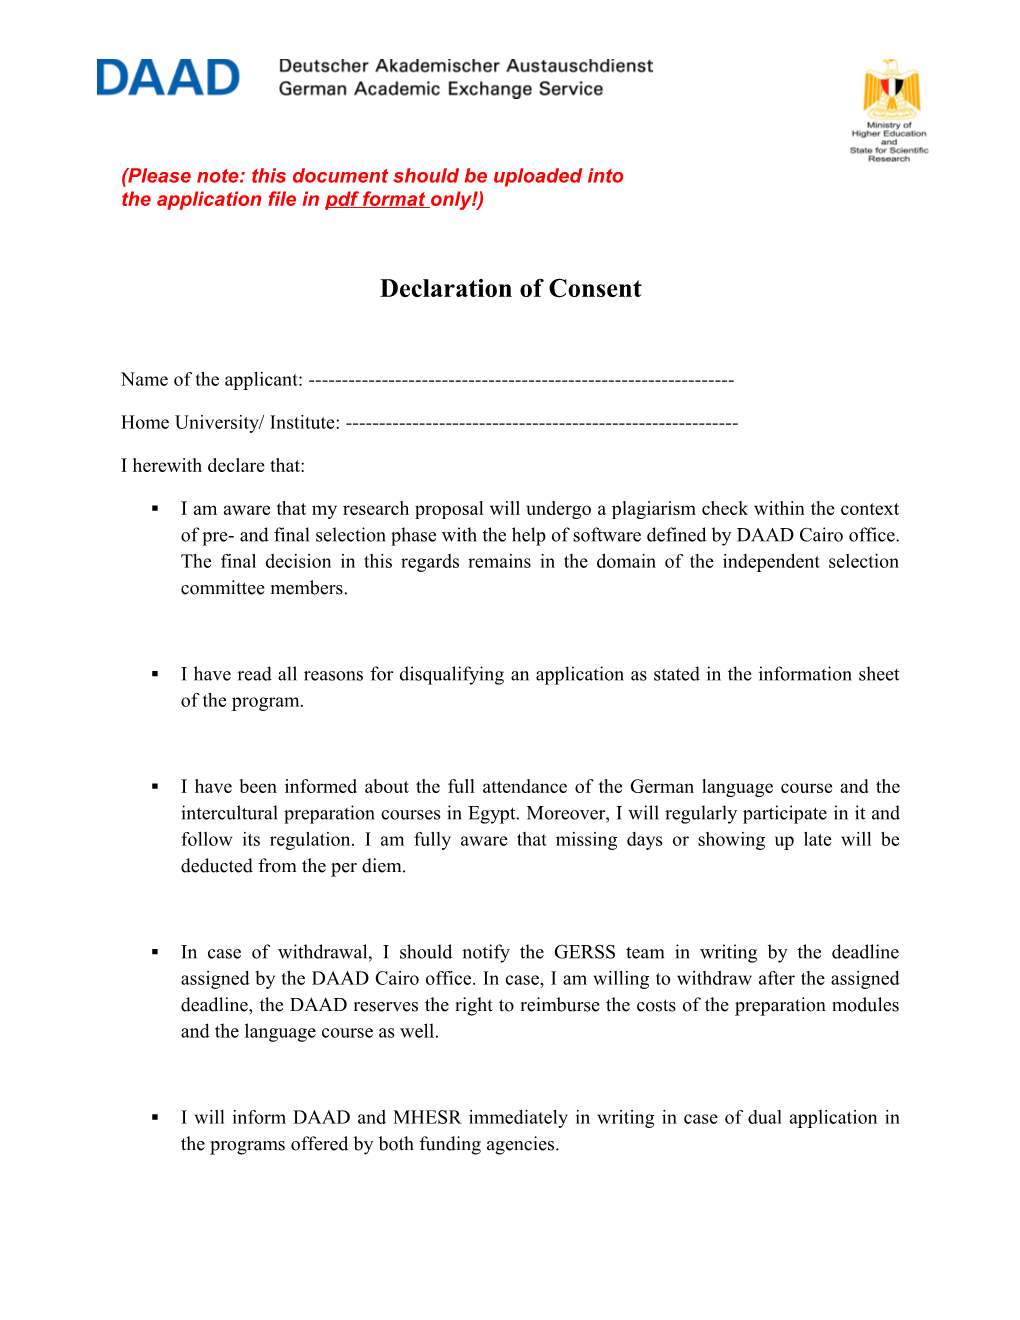 Please Note: This Document Should Be Uploaded Into the Application File in Pdf Format Only!